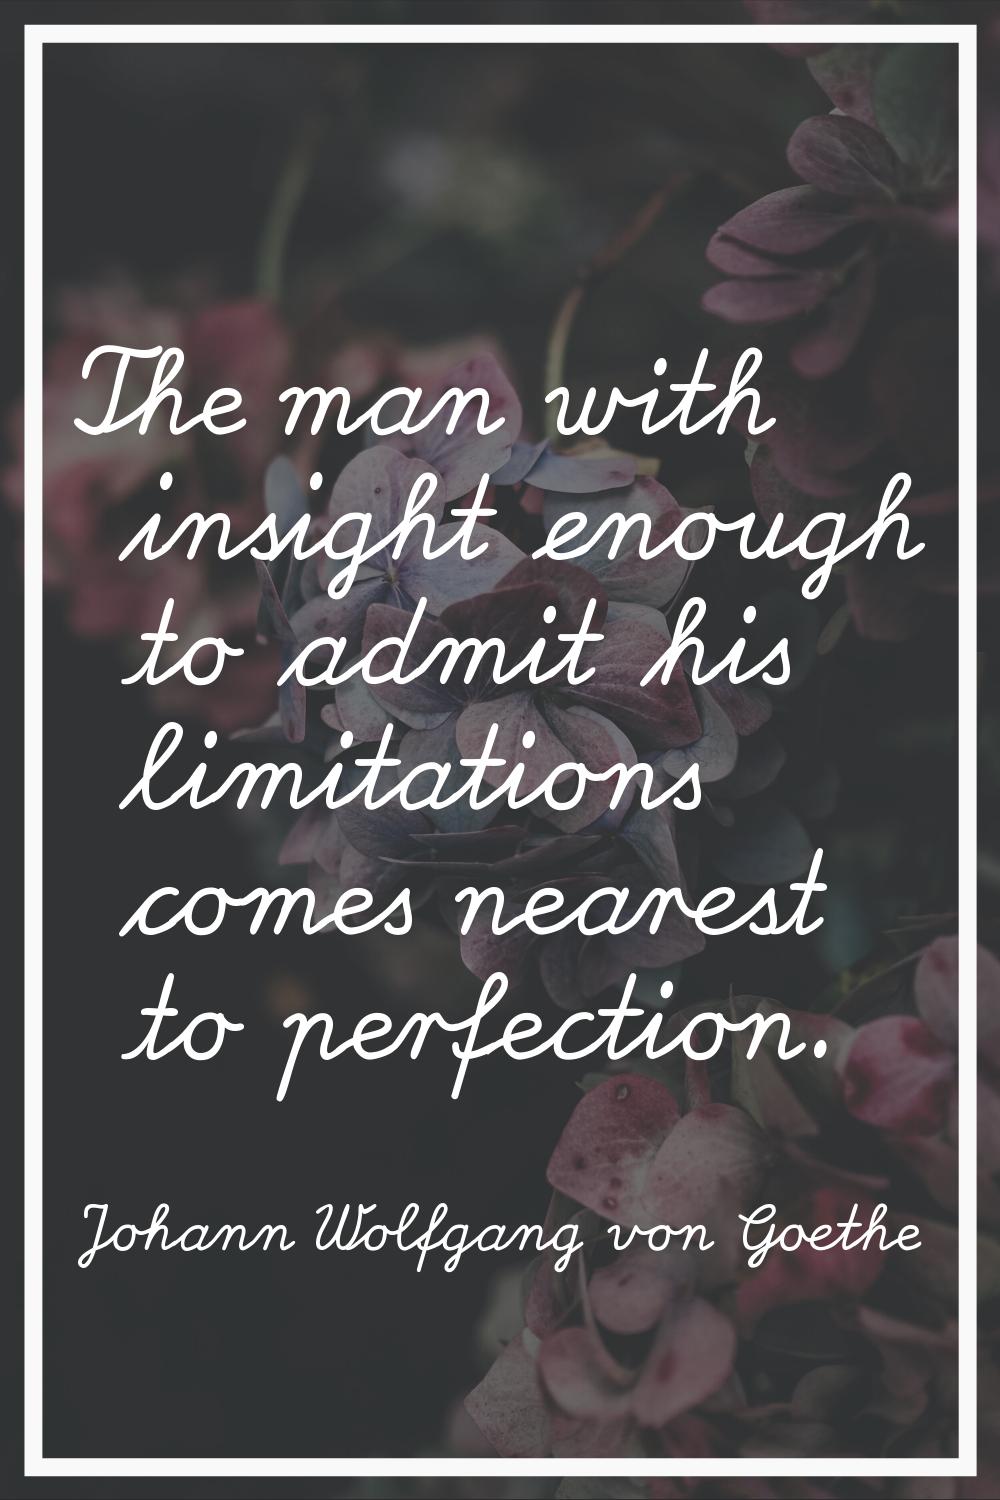 The man with insight enough to admit his limitations comes nearest to perfection.